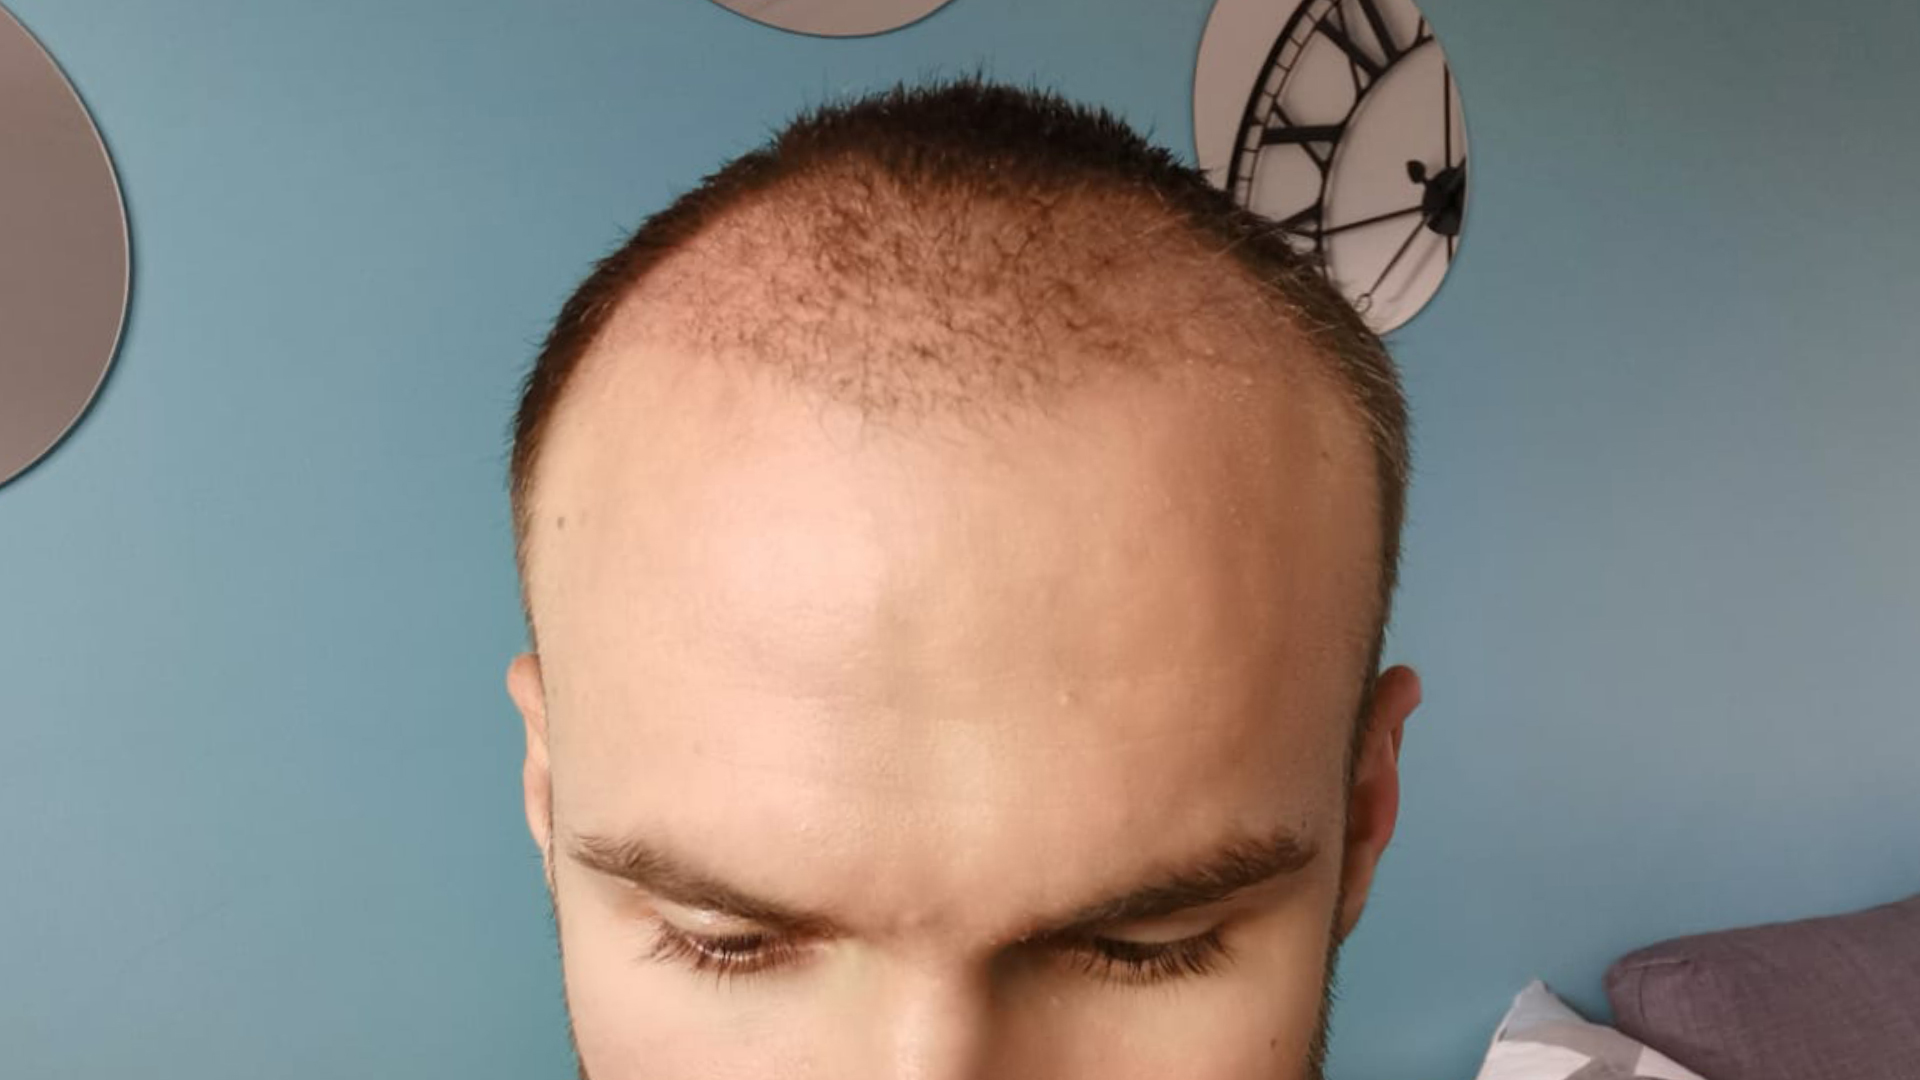 the shock loss after a hair transplant